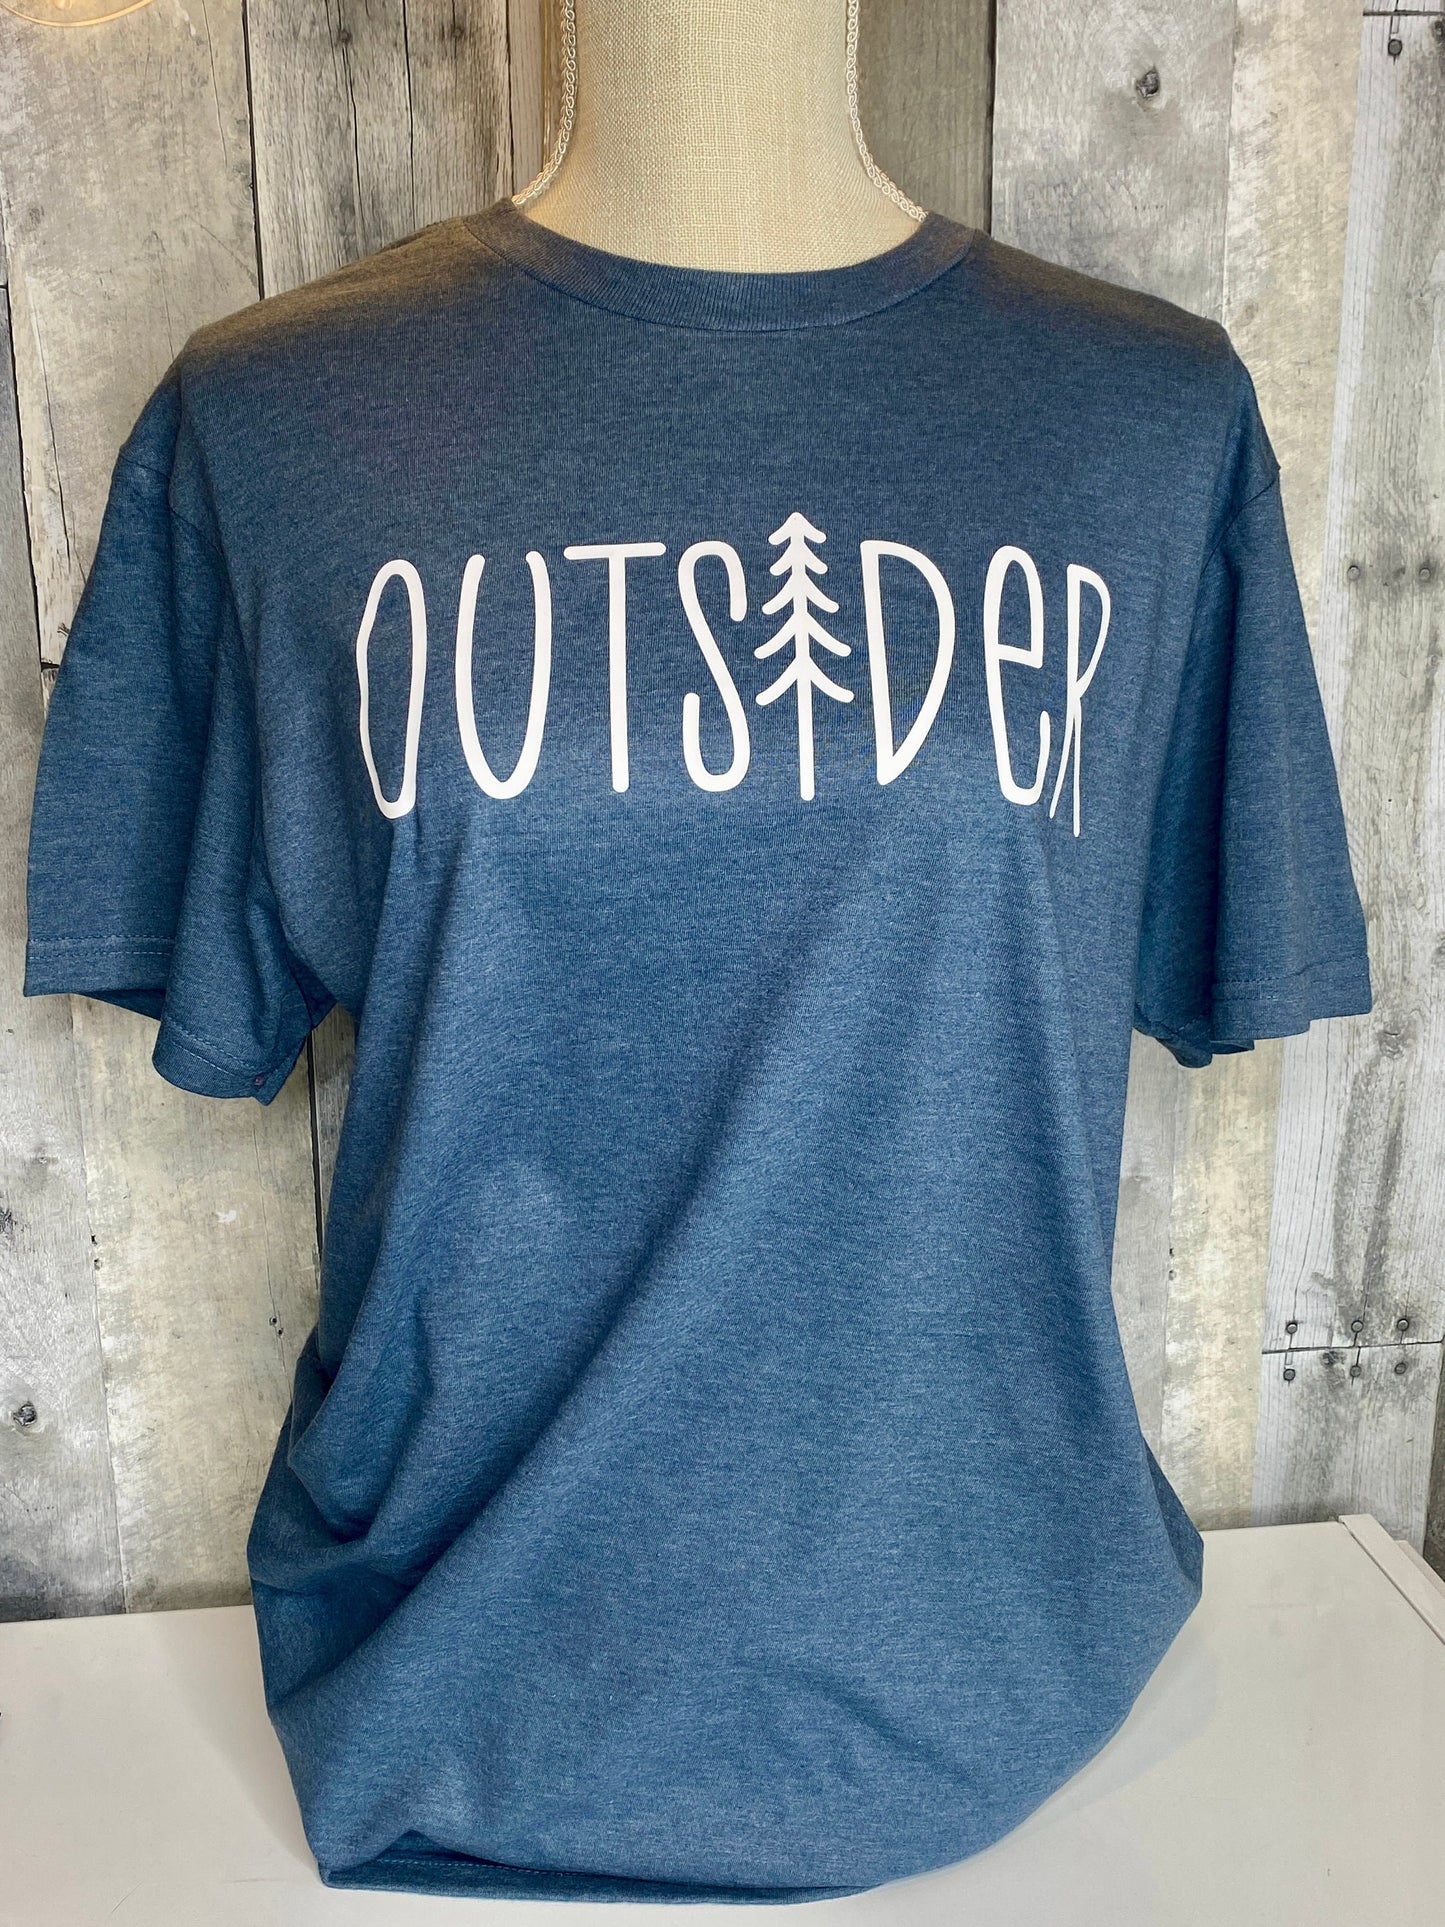 Outsider Tee Shirt, Hiking Gifts, Outdoorsy Gifts